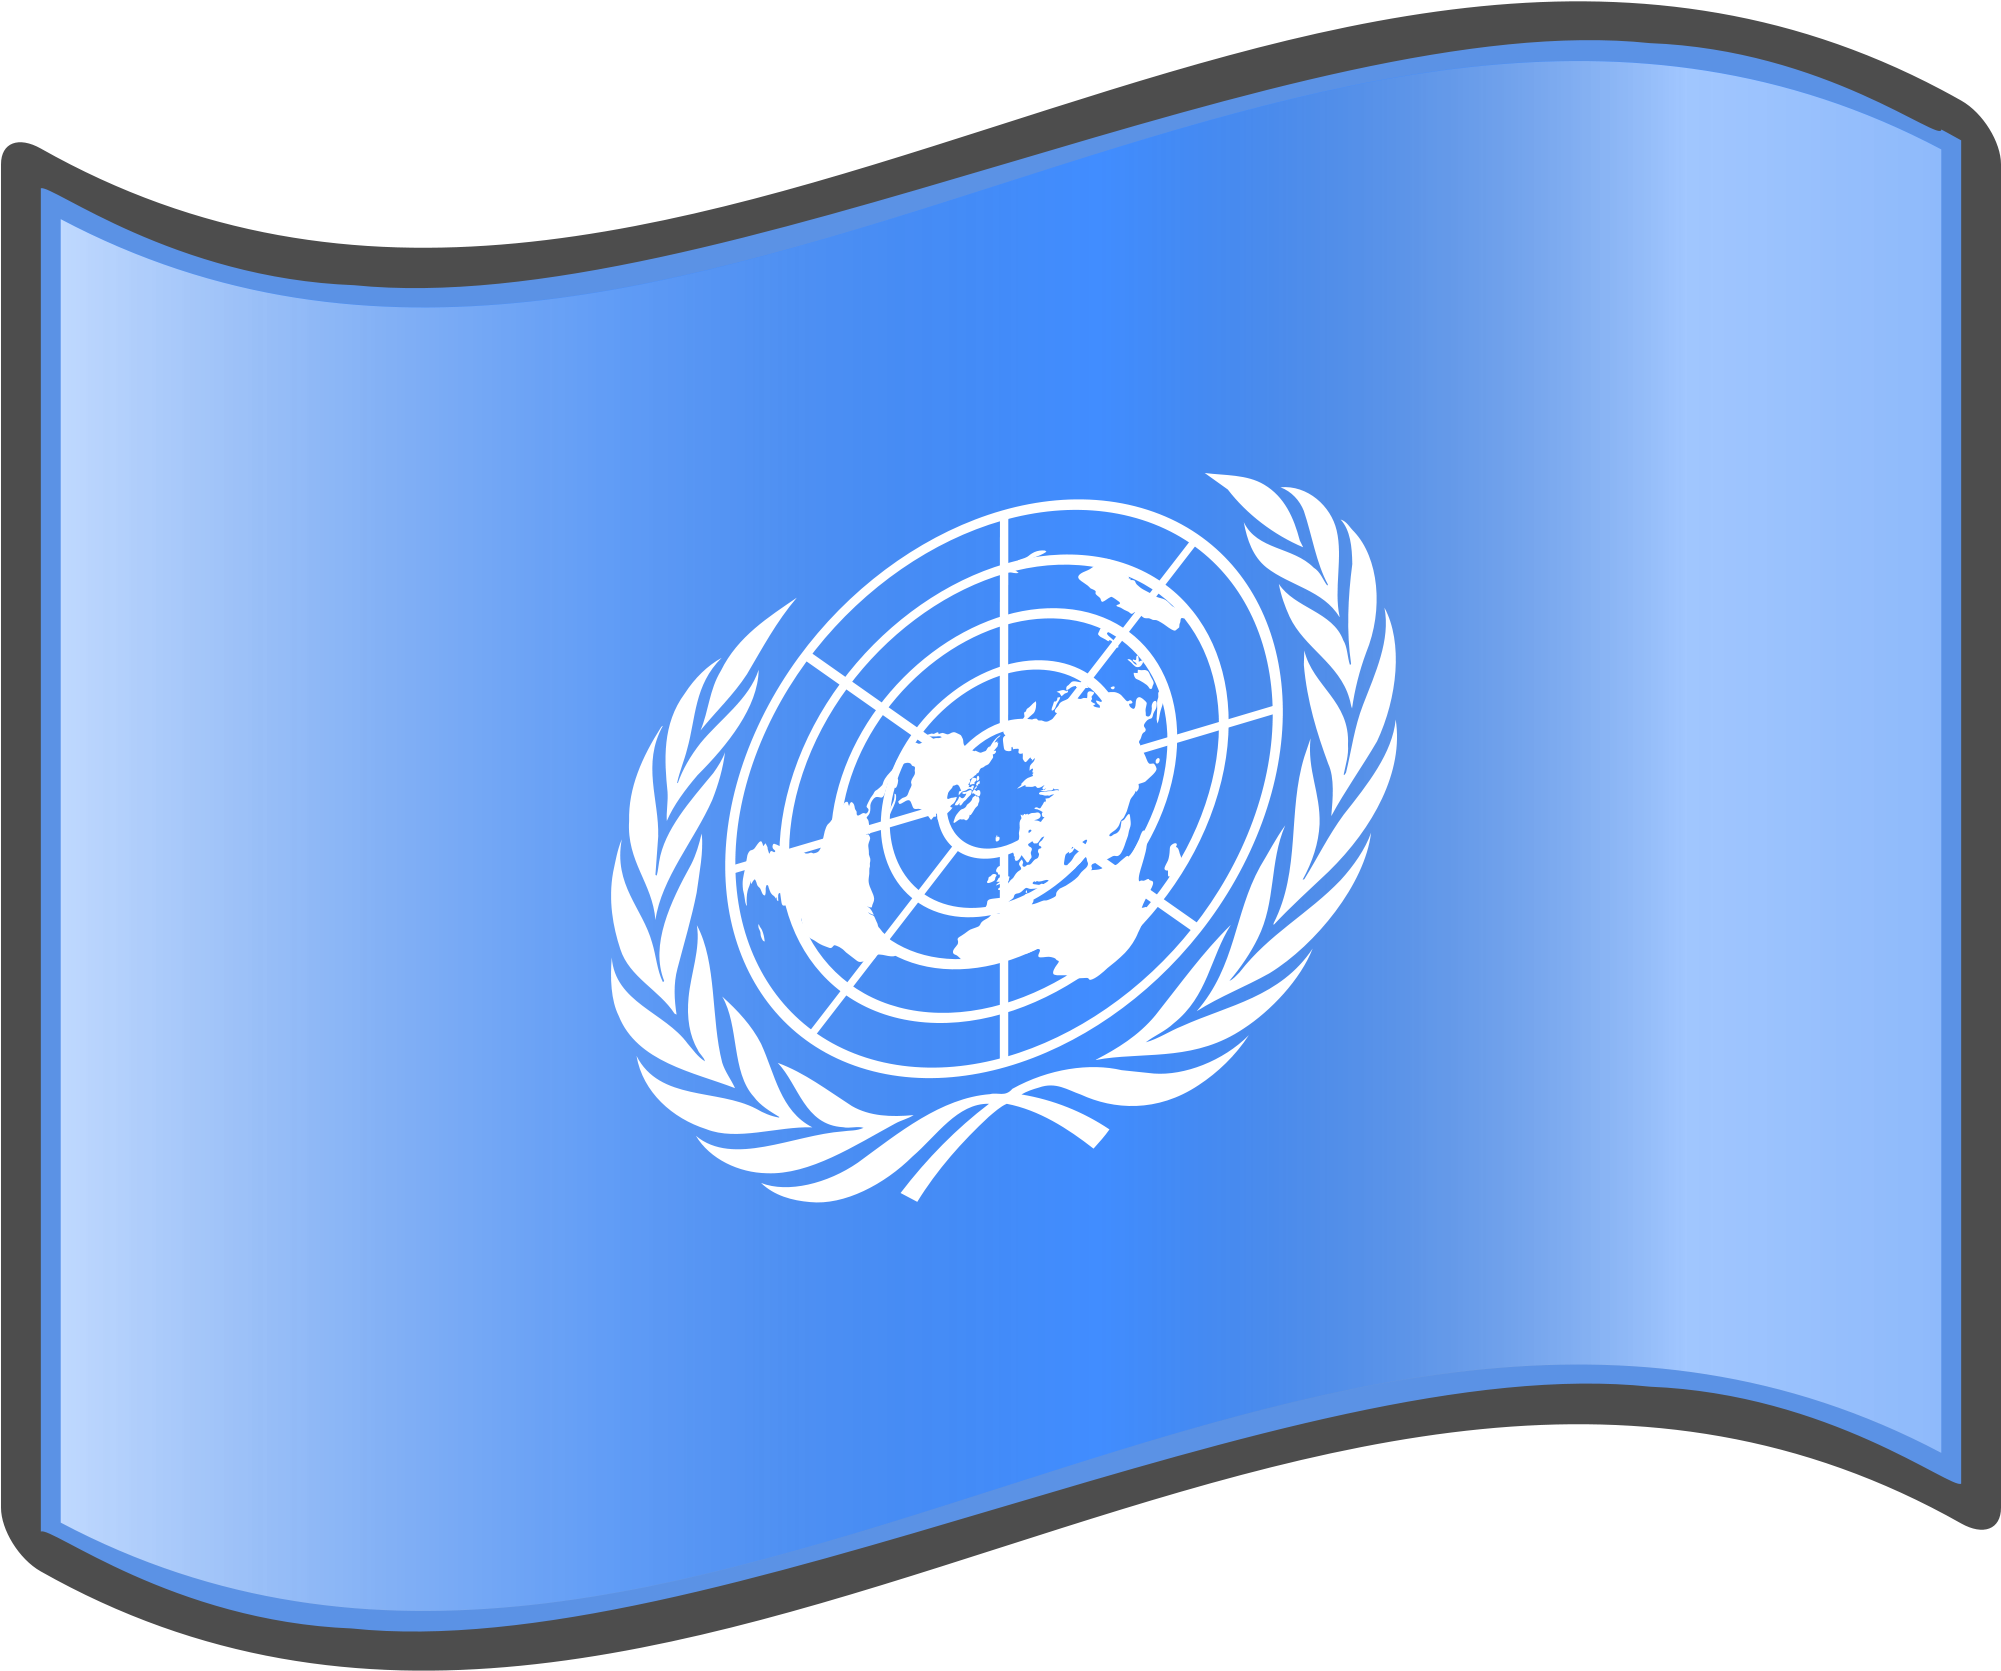 United Nations Flag Png Images Transparent Background Png Play